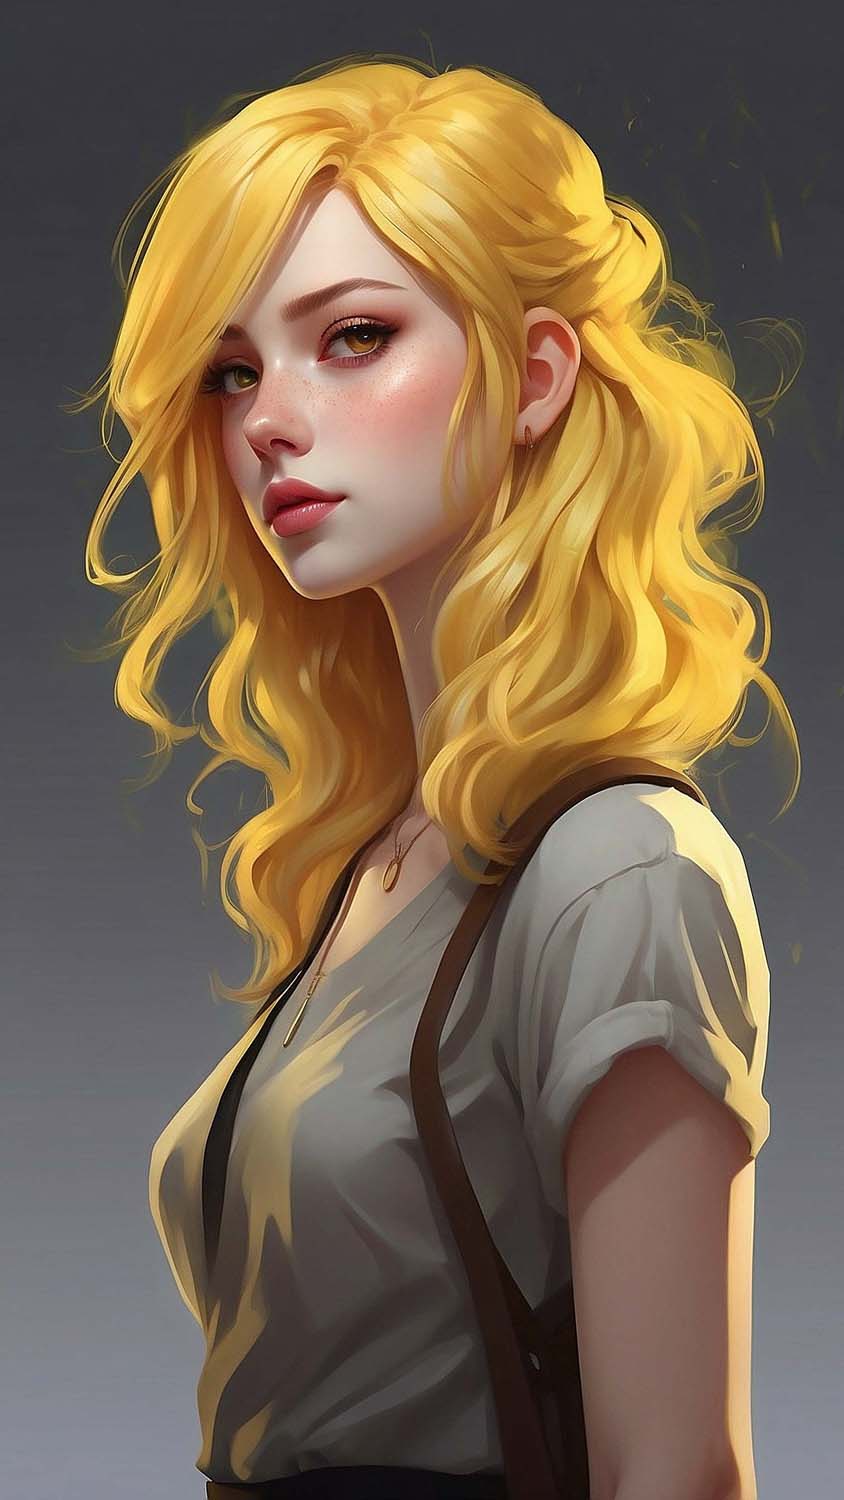 Girl with Golden Hairs